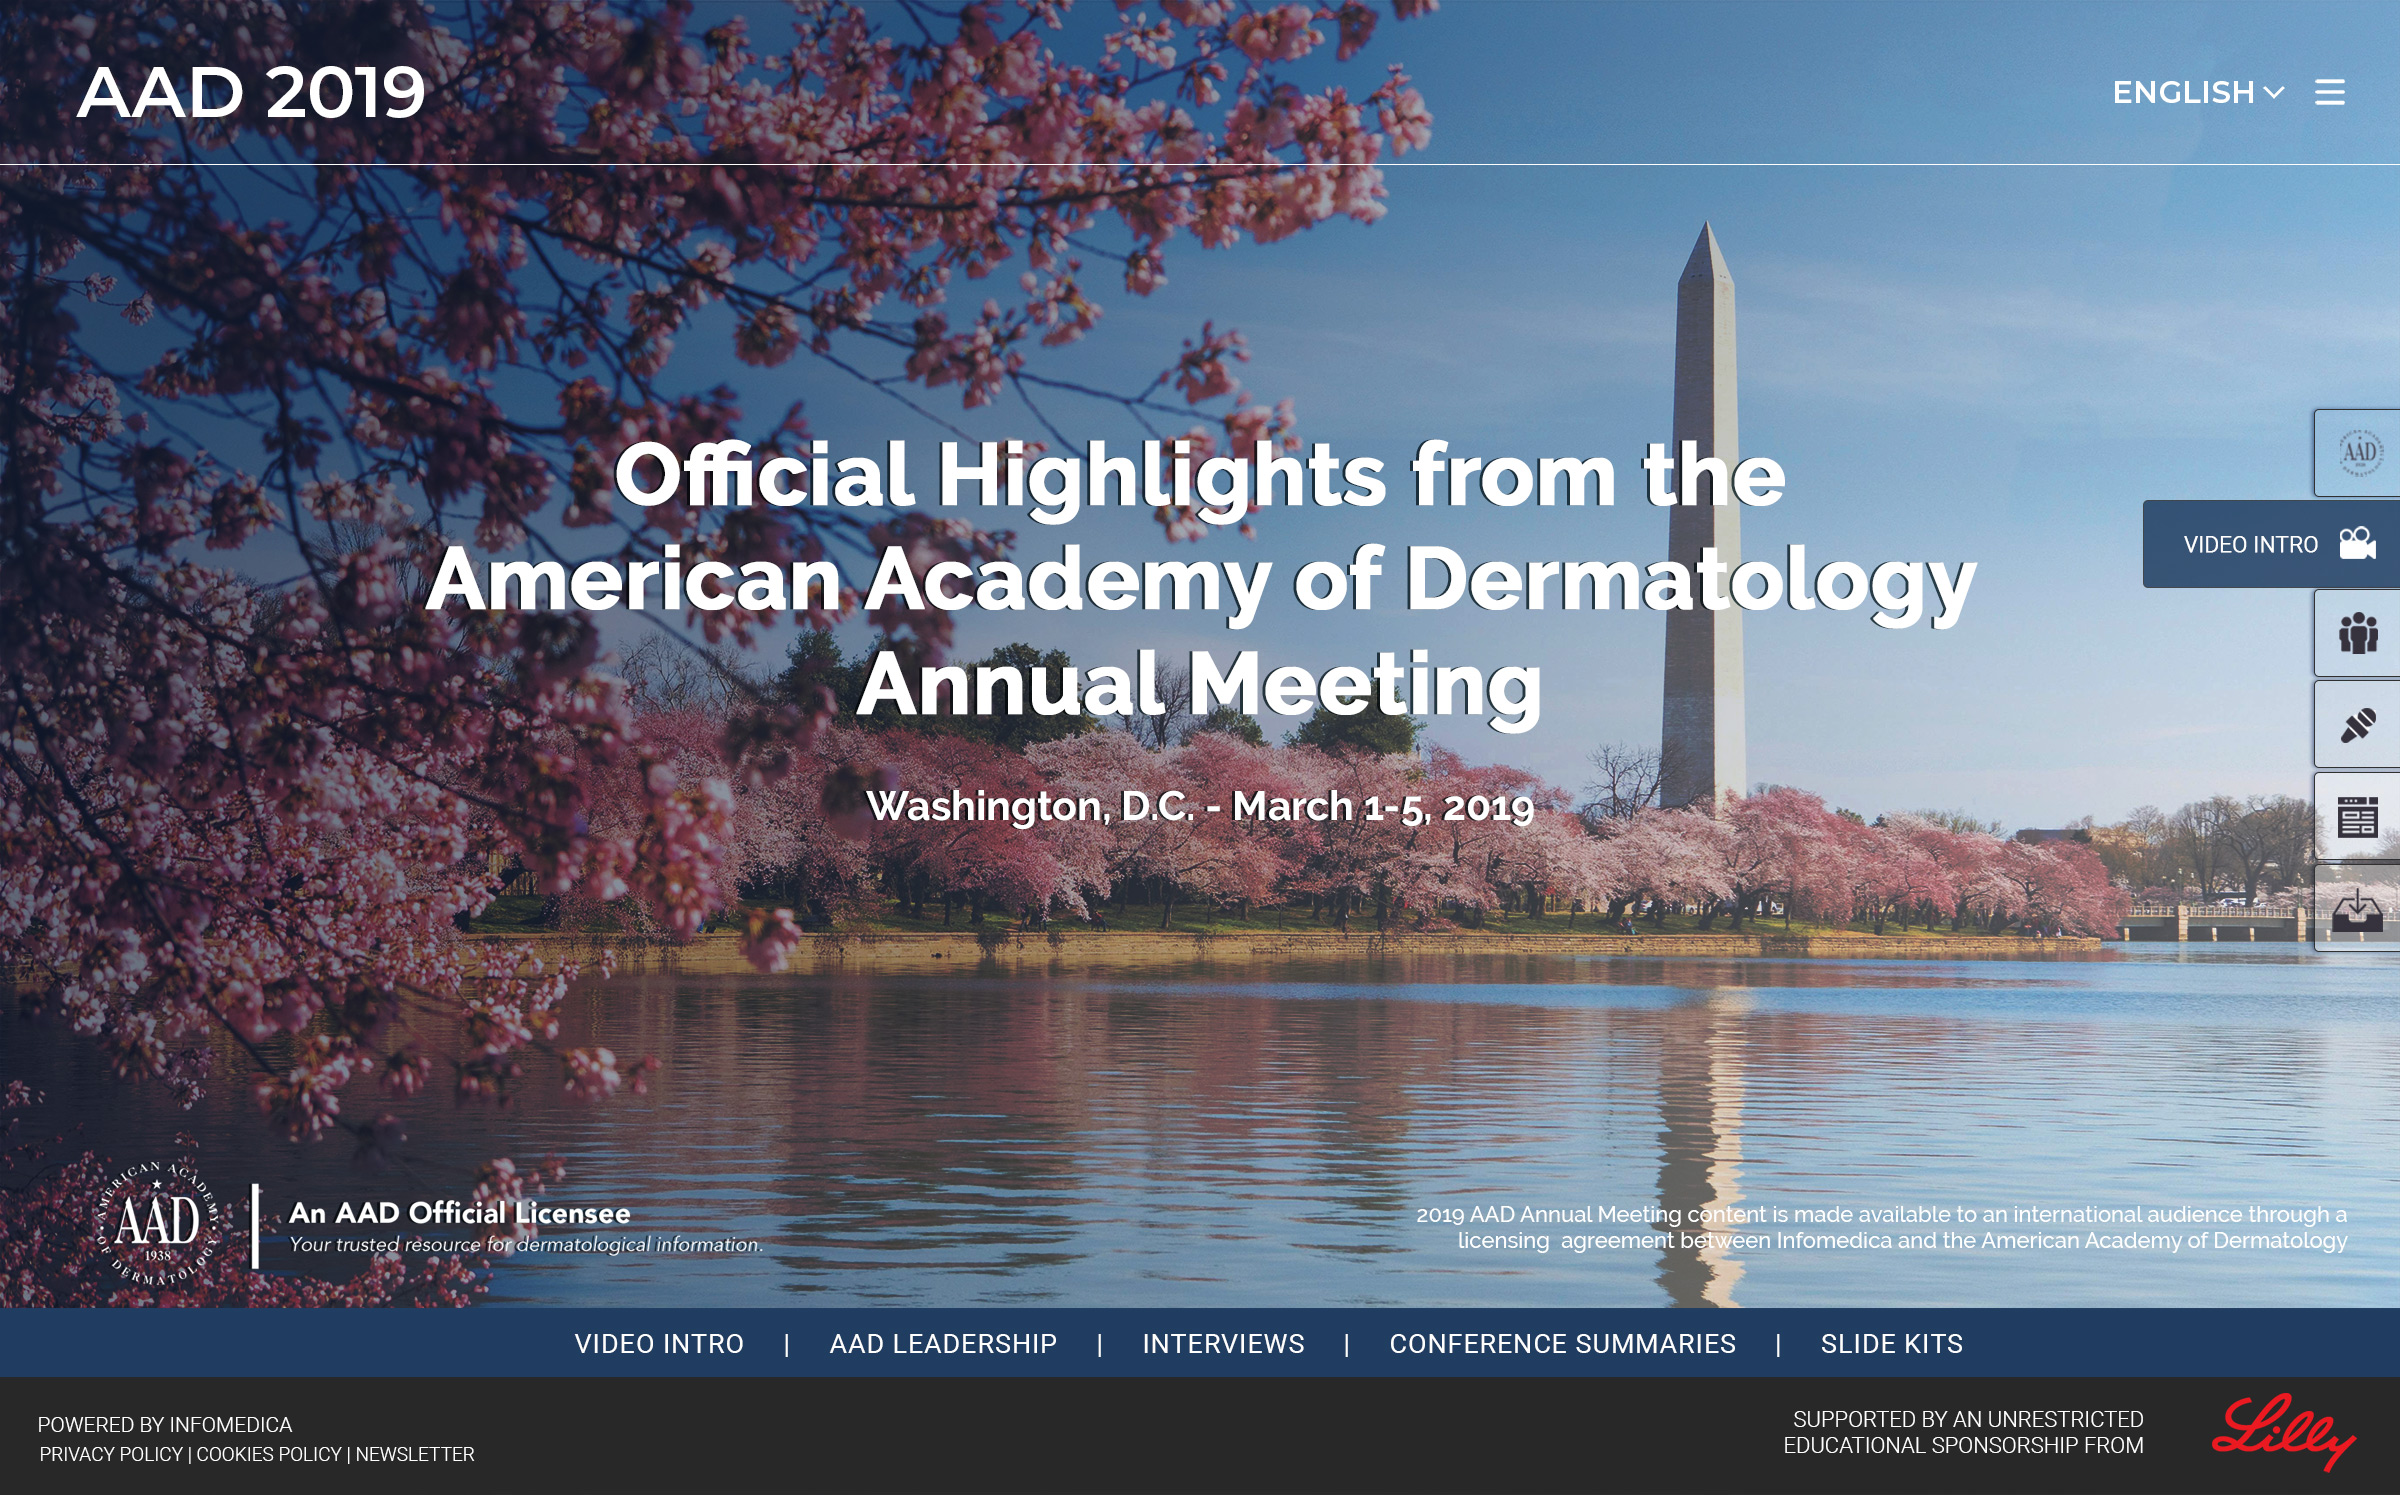 Highlights dal Congresso Annuale 2019 dell'American Academy Of Dermatology